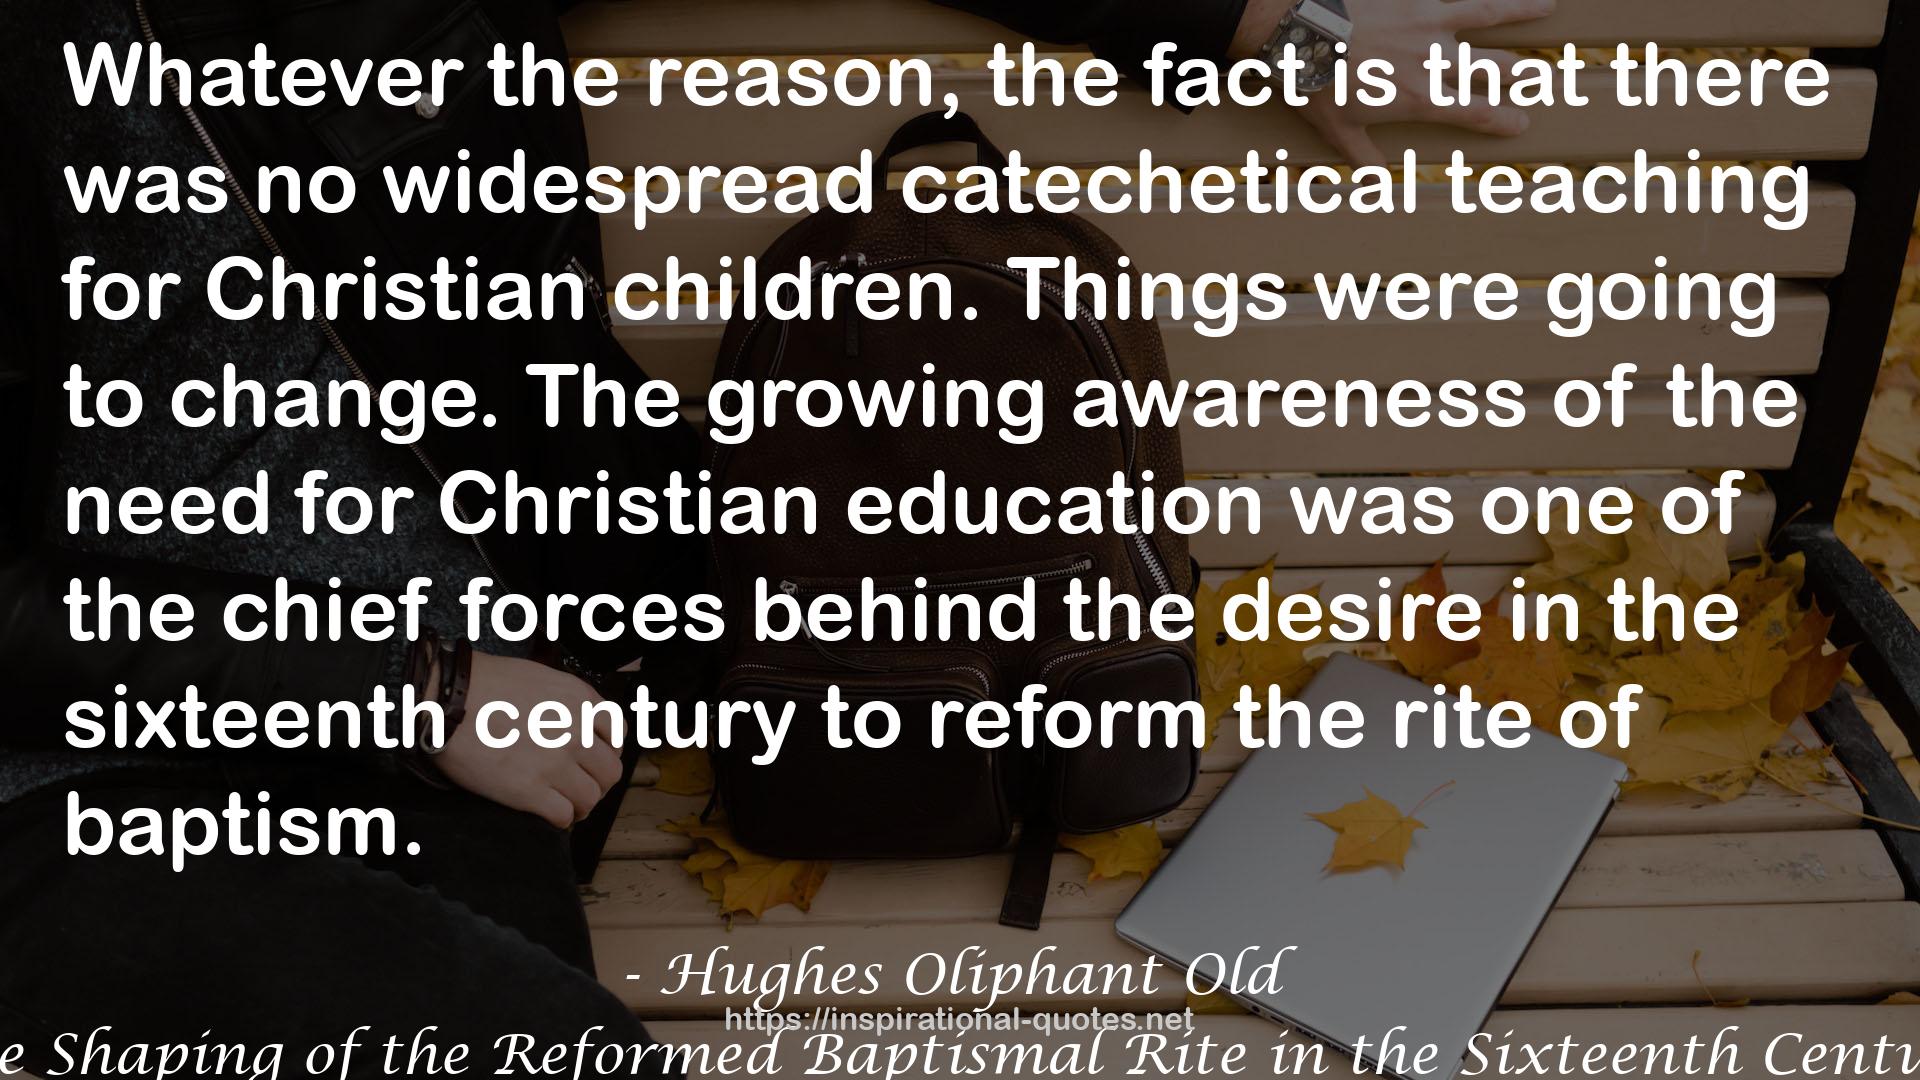 The Shaping of the Reformed Baptismal Rite in the Sixteenth Century QUOTES